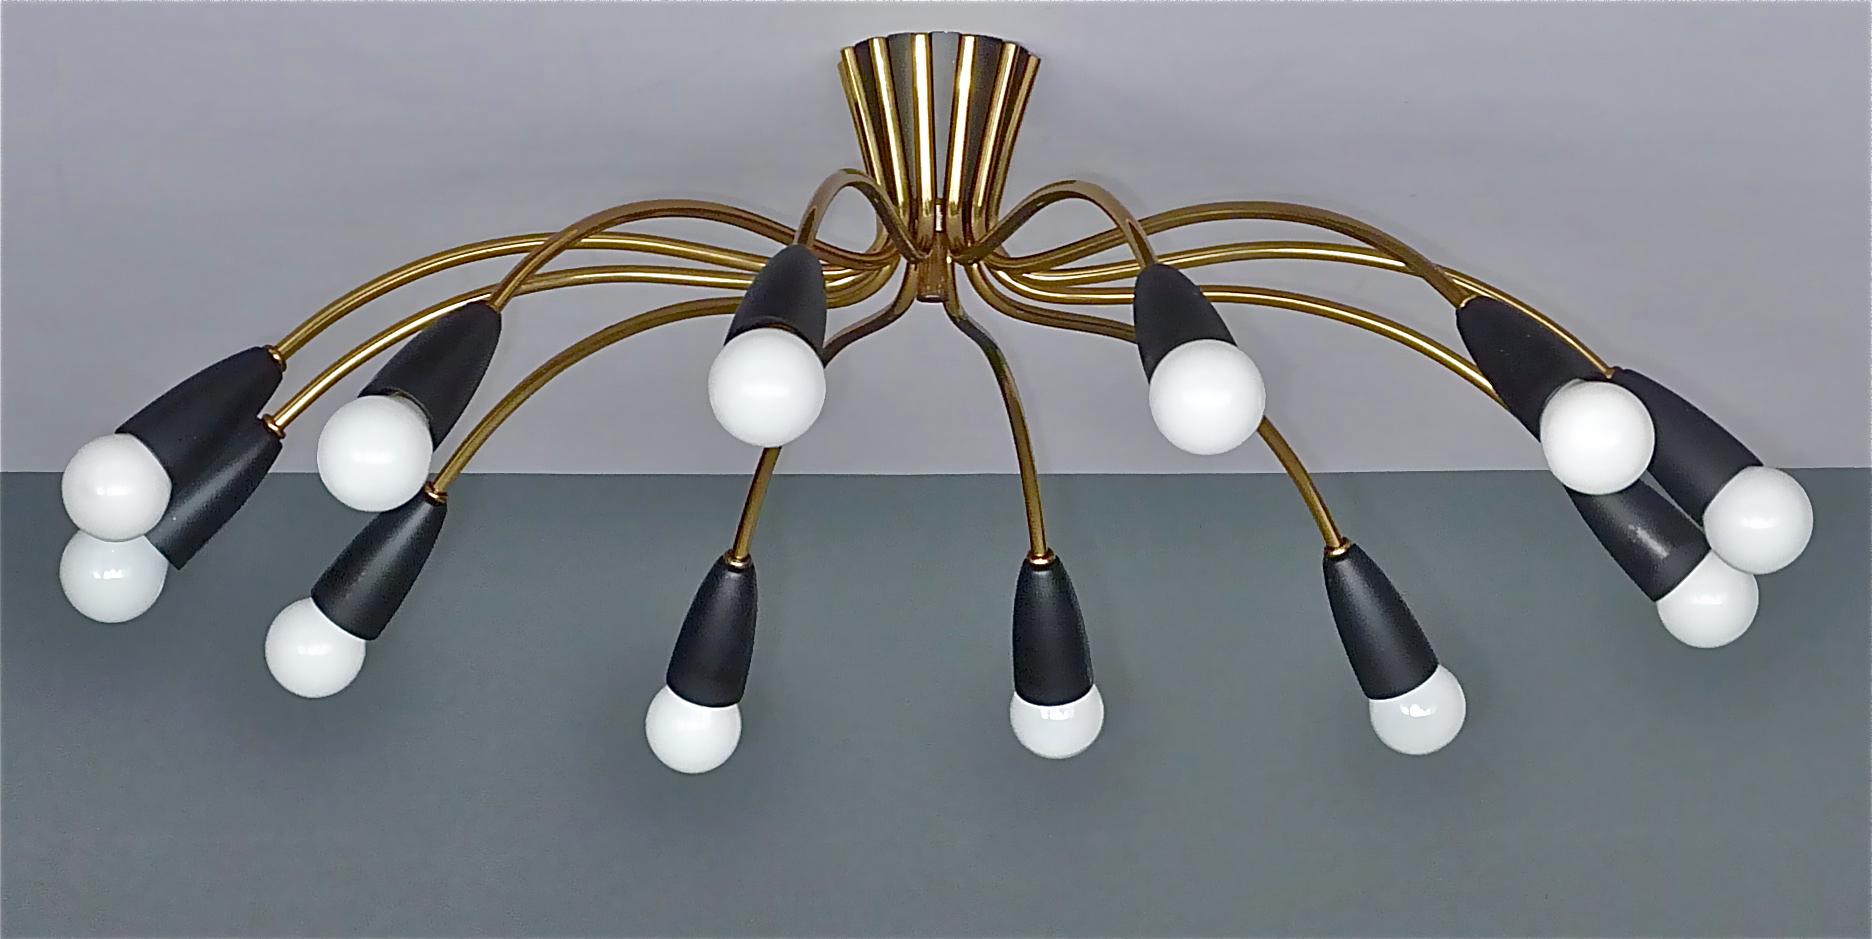 Large midcentury 12-light sputnik flush mount or ceiling chandelier made by Kaiser, Kalmar or Stilnovo, Germany, Austria or Italy, circa 1950s. The elegant patinated brass ceiling lamp combined with black enameled brass details and plastic caps